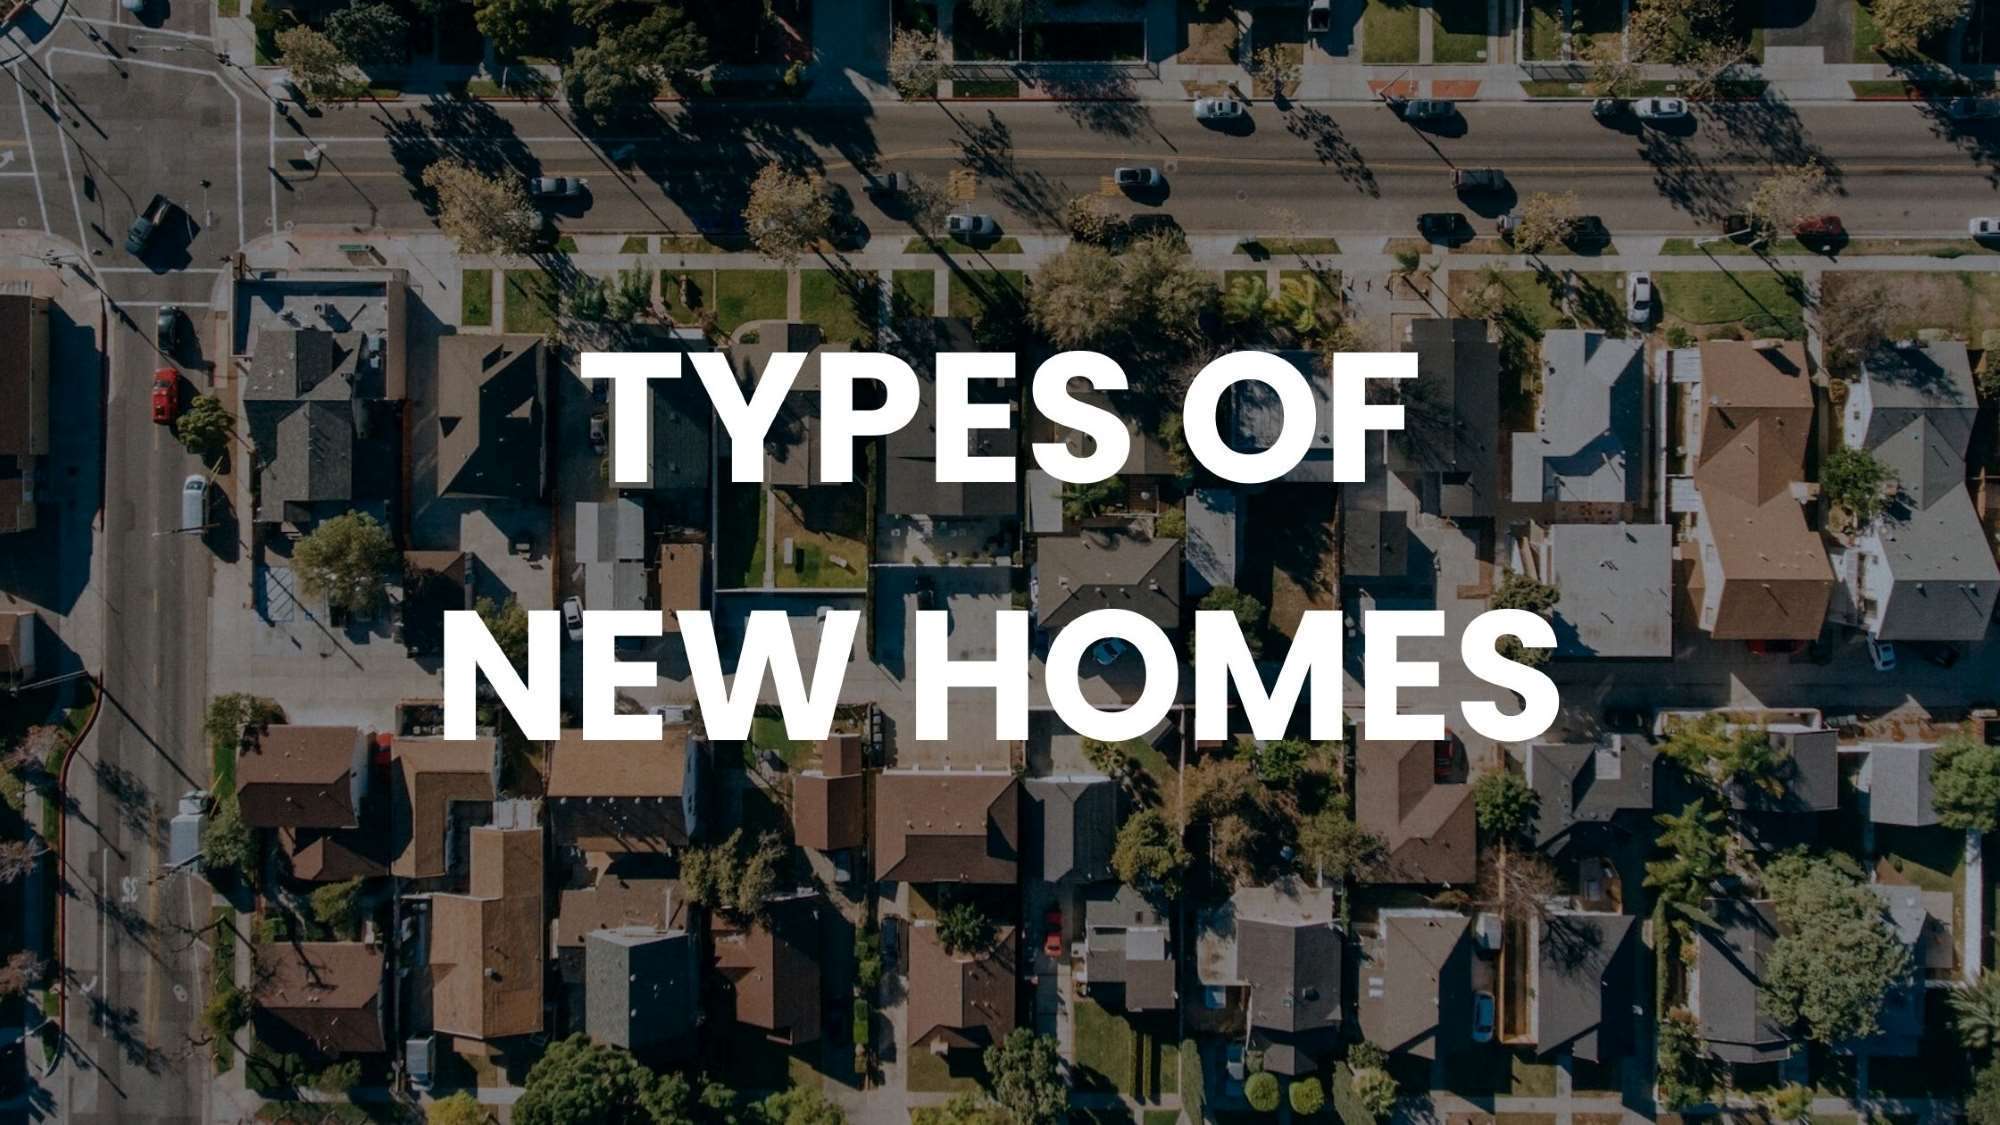 Aerial drone view of a suburb with overlay text "Types of New Homes" in white.